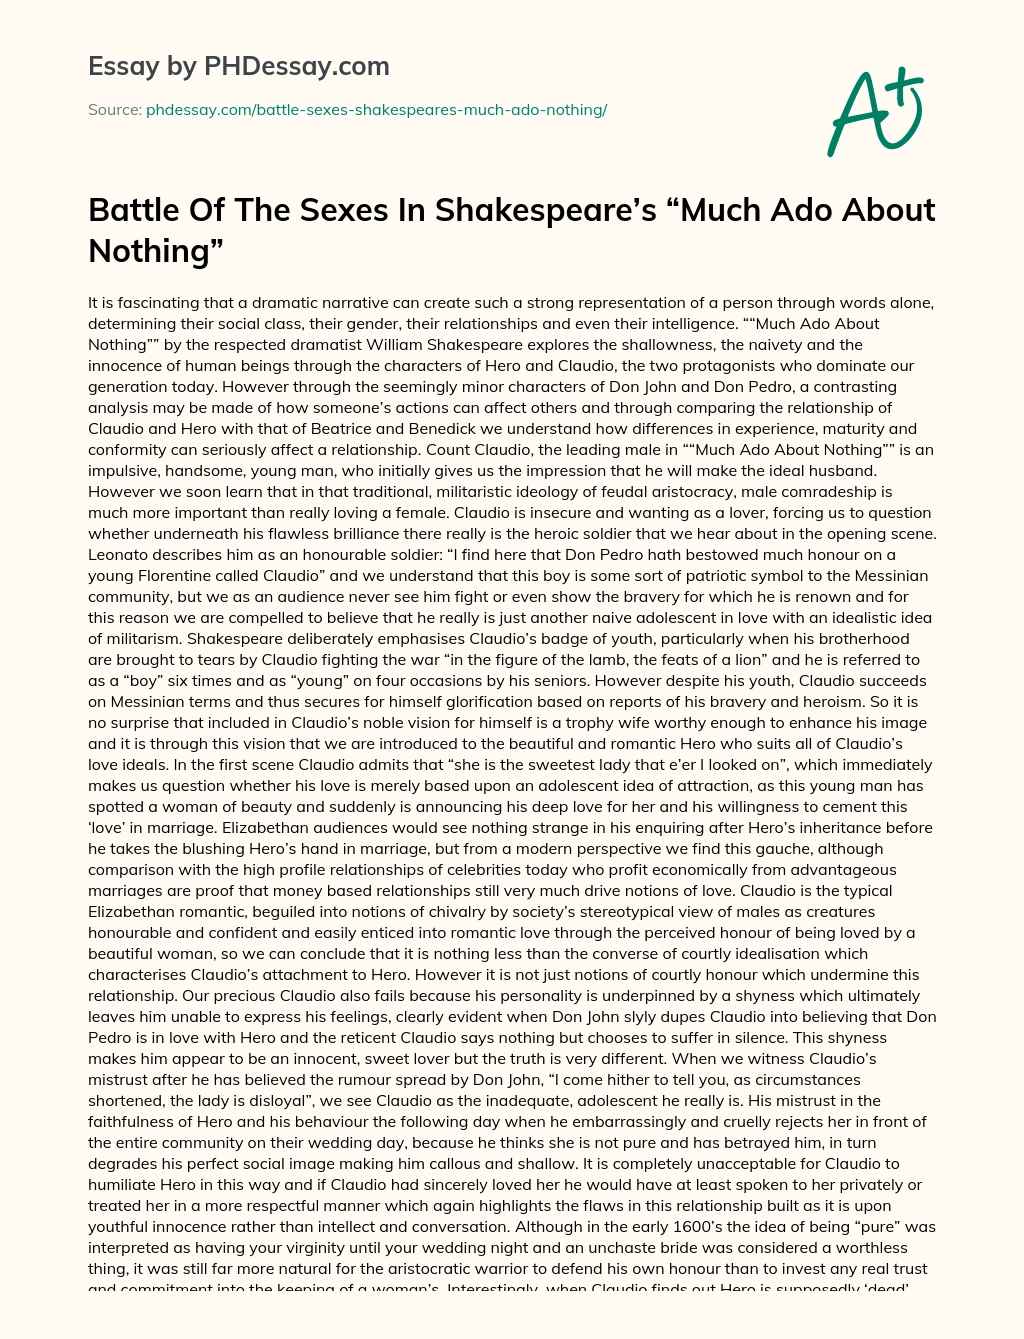 Battle Of The Sexes In Shakespeare’s “Much Ado About Nothing” essay